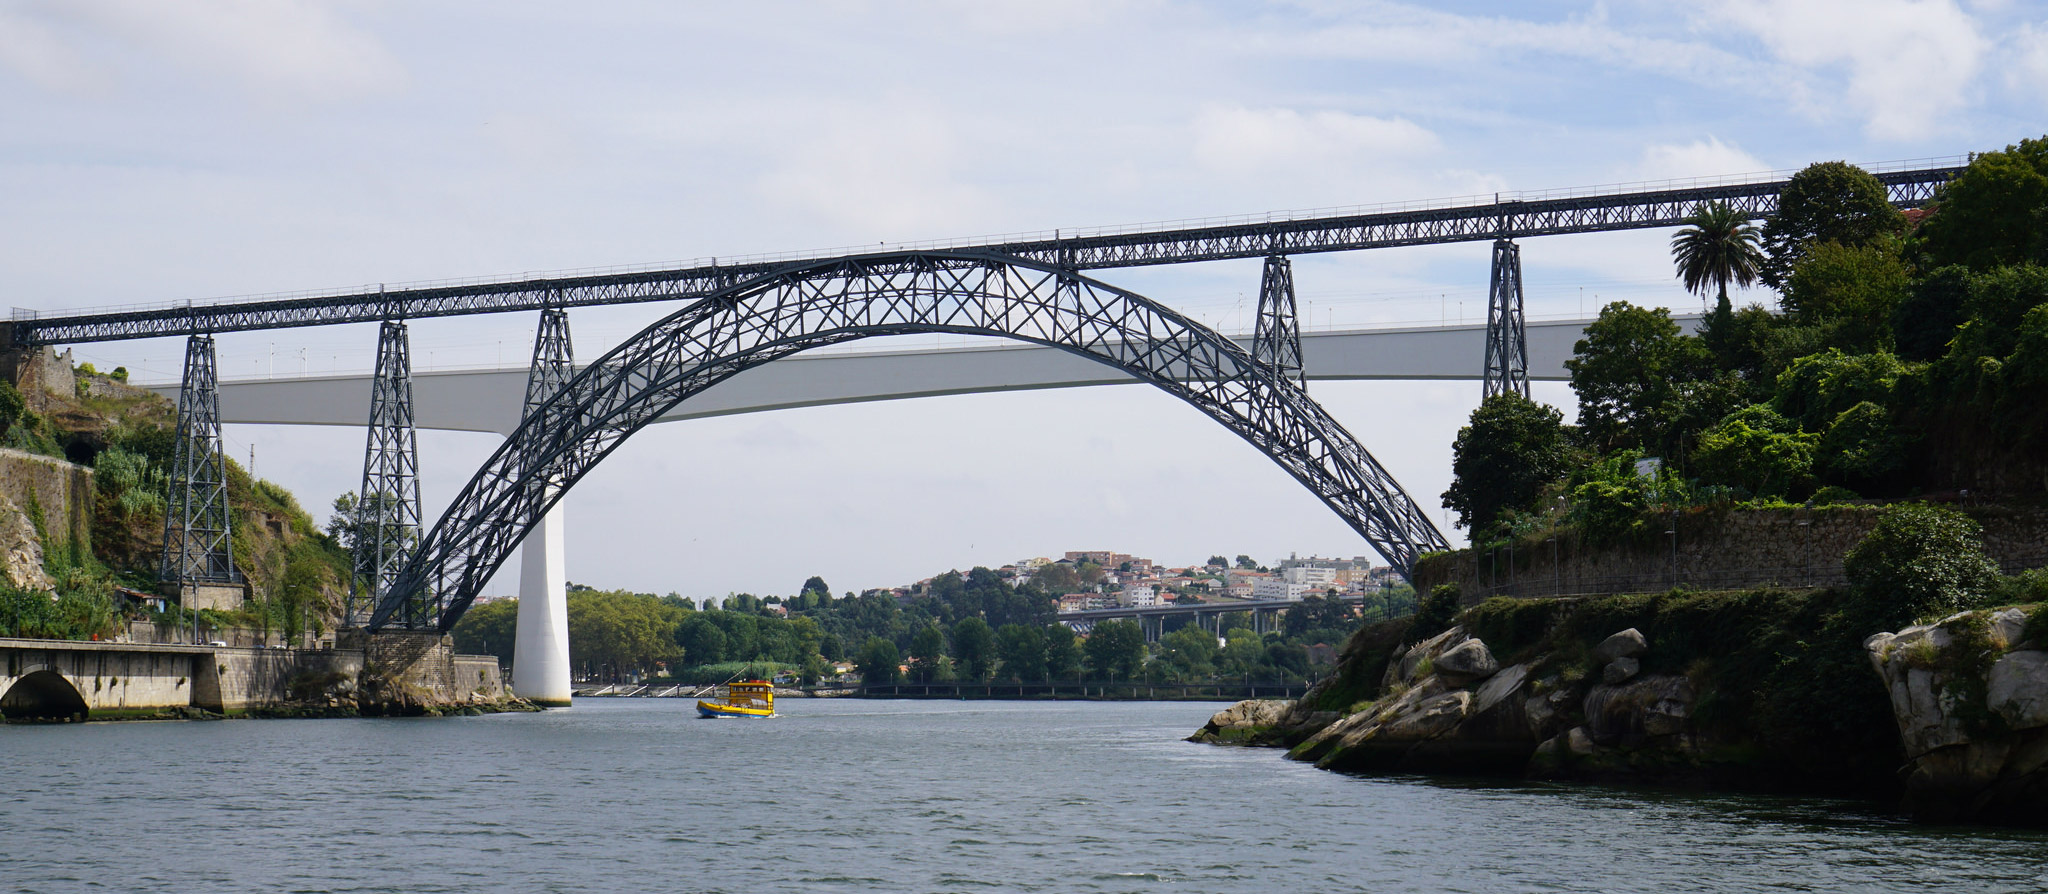 The old Ponte Dona Maria railway bridge with the newer railway bridge in the background. Look to the left as you arrive at Porto Campanha for a beautiful first glimpse of the Douro.